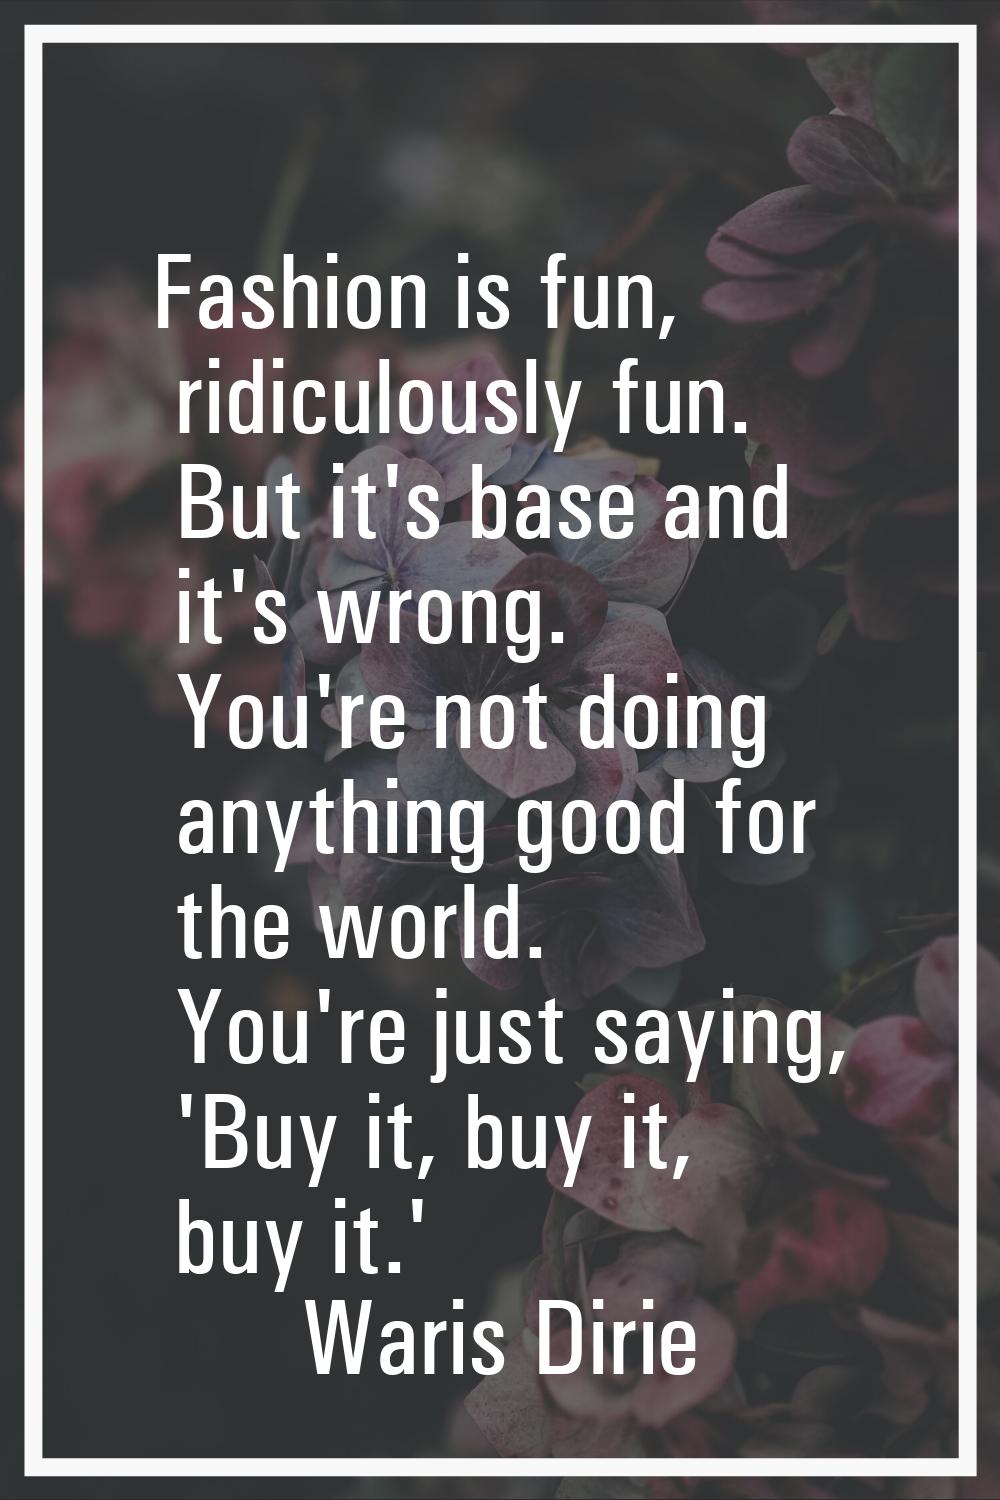 Fashion is fun, ridiculously fun. But it's base and it's wrong. You're not doing anything good for 